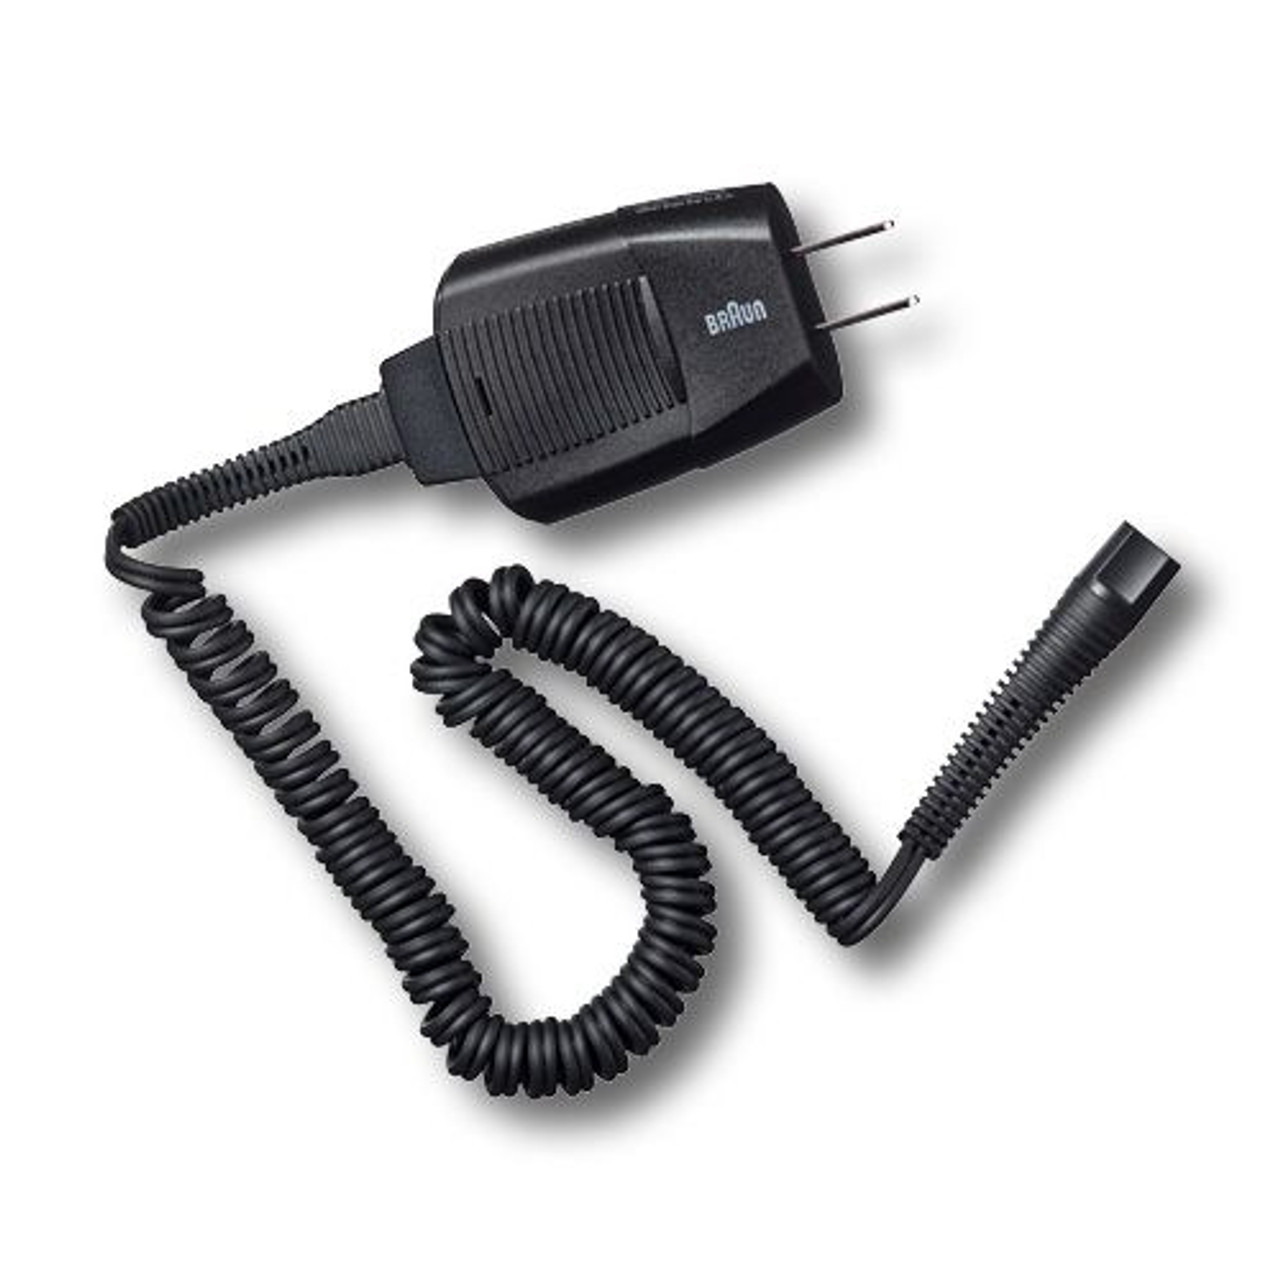 Braun Series 1 Shaver Replacement Power Cord and Charger Click for Model Numbers!